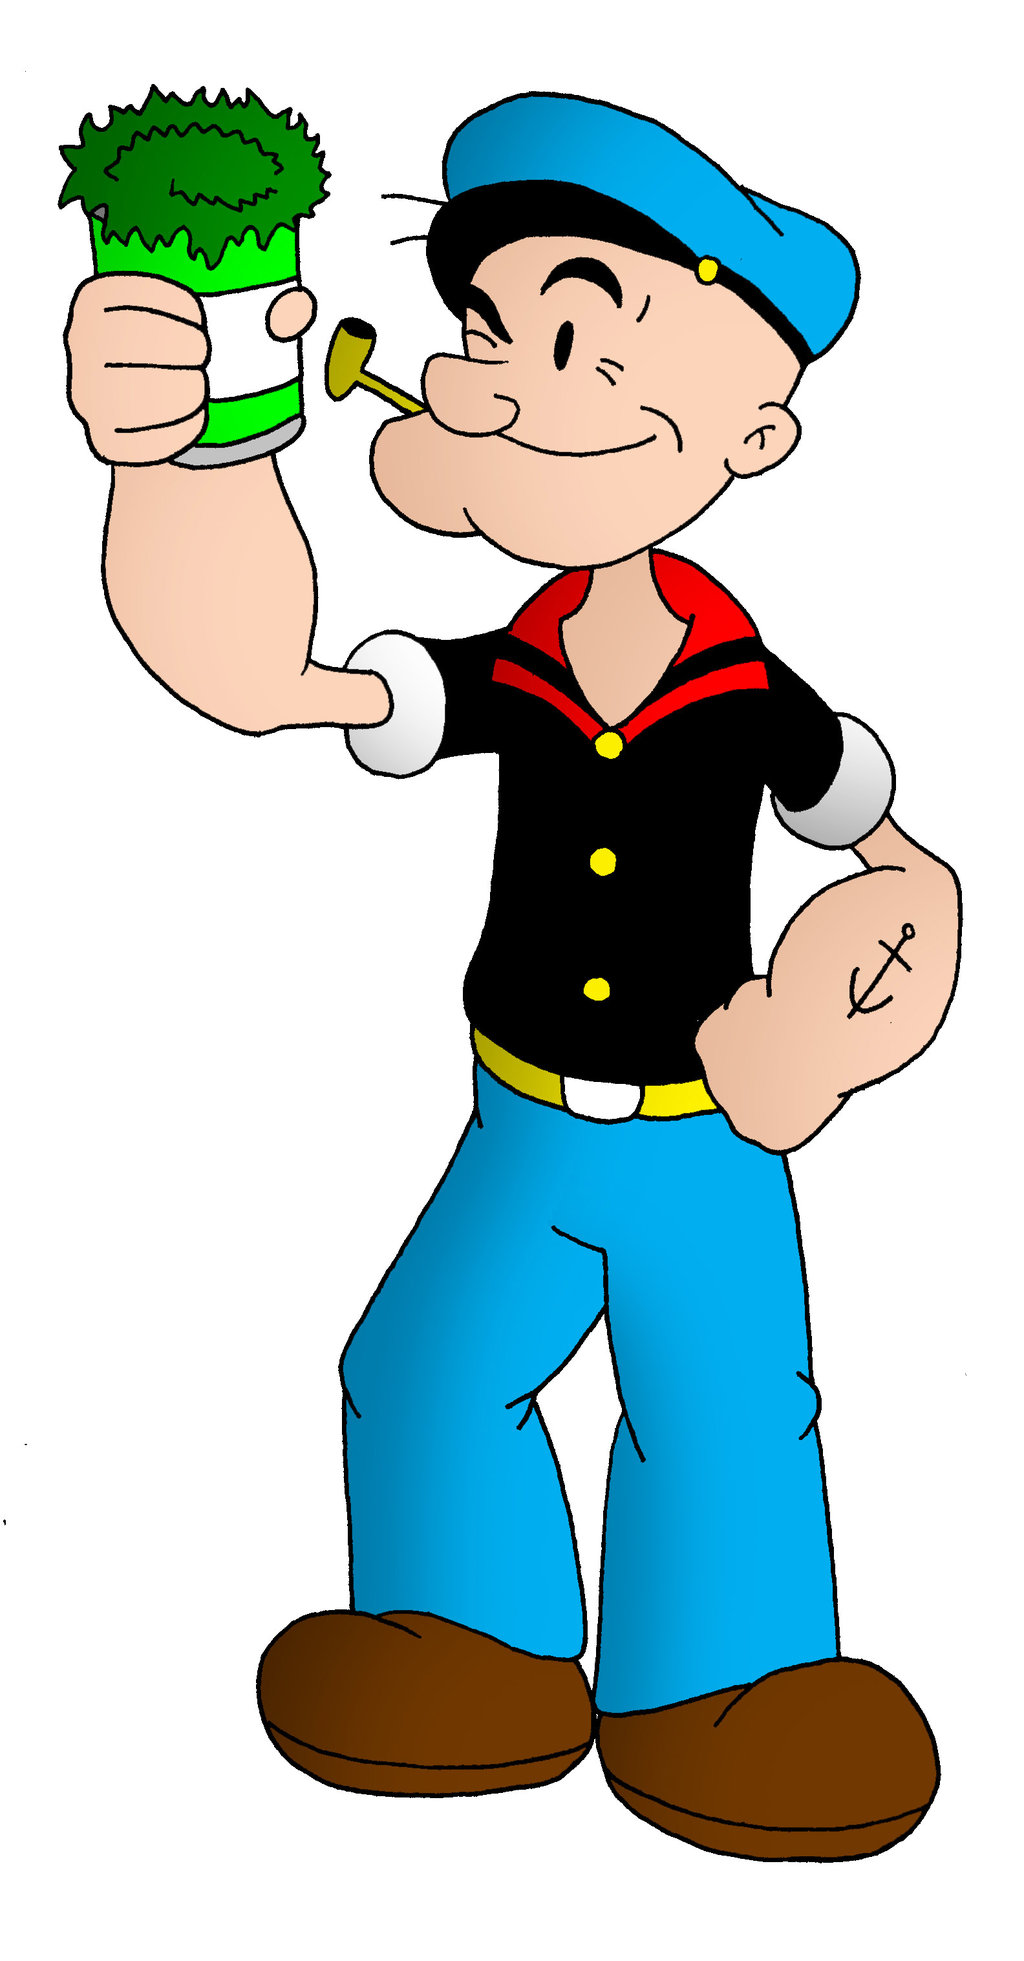 Popeye the Sailor Man by streetgals9000